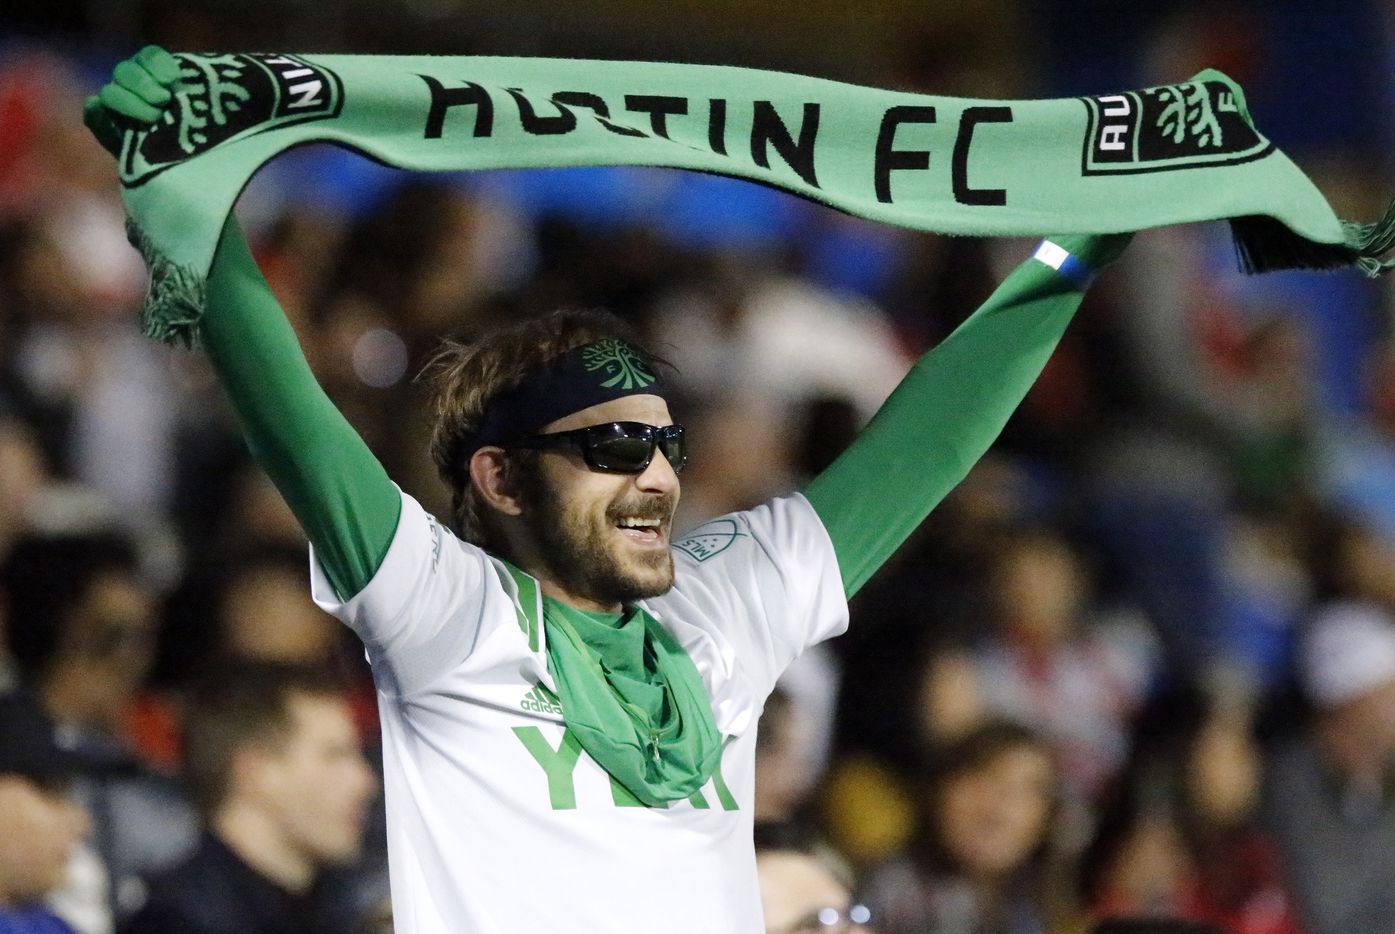 An Austin FC fans celebrates the his team going up 1-0 during the first half as FC Dallas hosted Austin FC at Toyota Stadium in Frisco on Saturday, October 30, 2021. (Stewart F. House/Special Contributor)